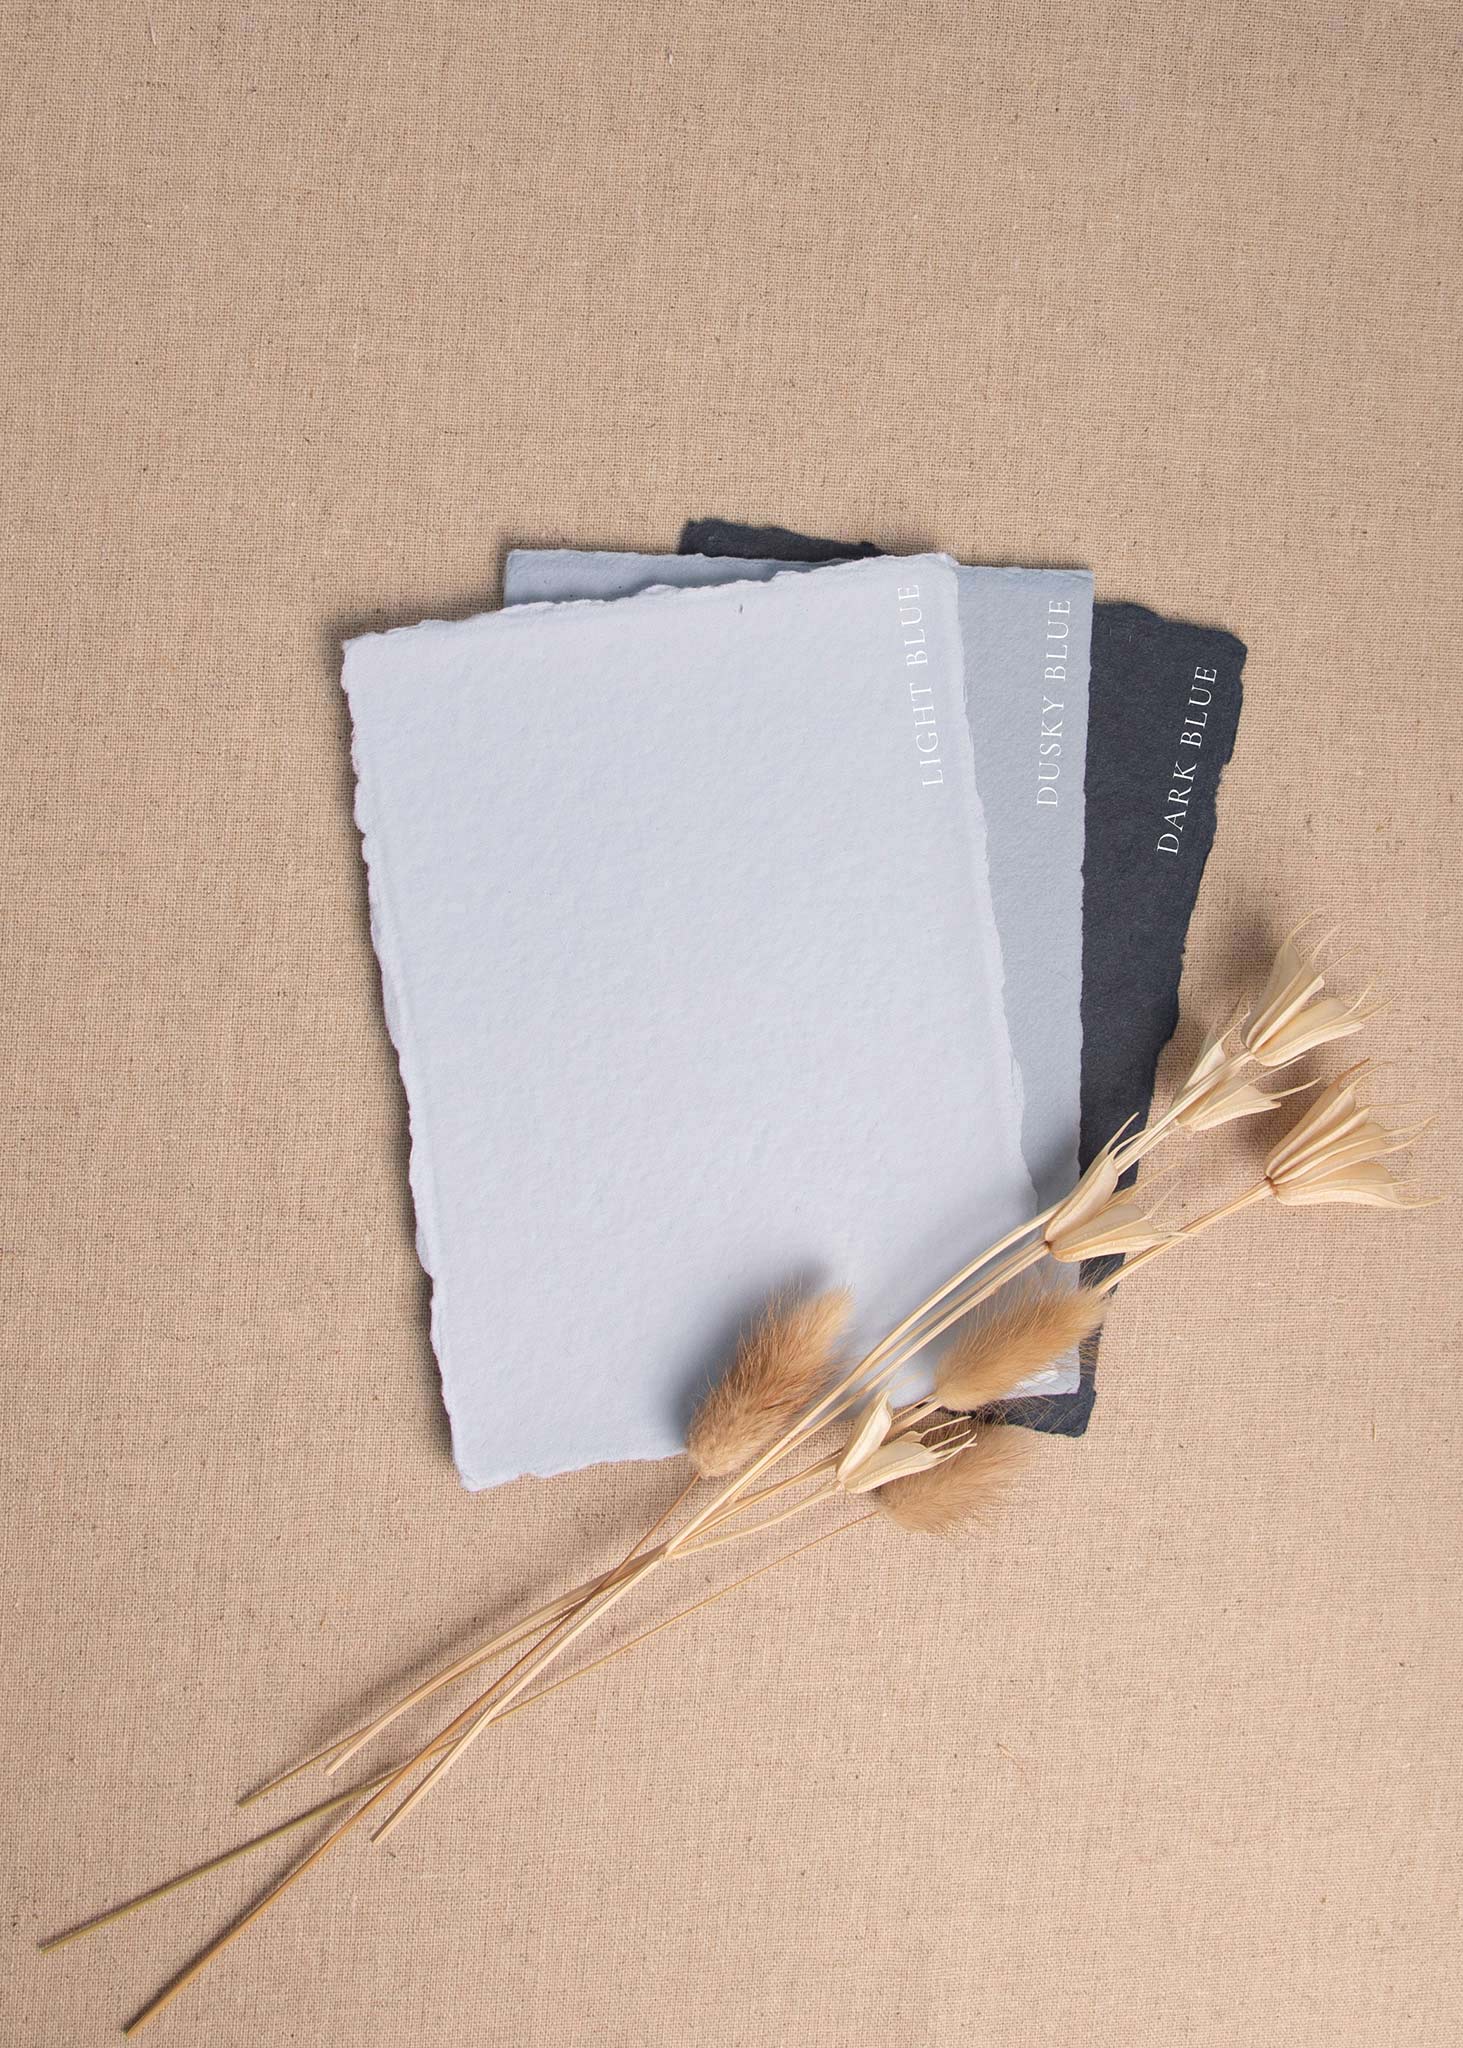 Fanned pile of Light blue, Dusky blue, Dark Blue handmade paper envelopes with deckle edge surrounded by dried flowers